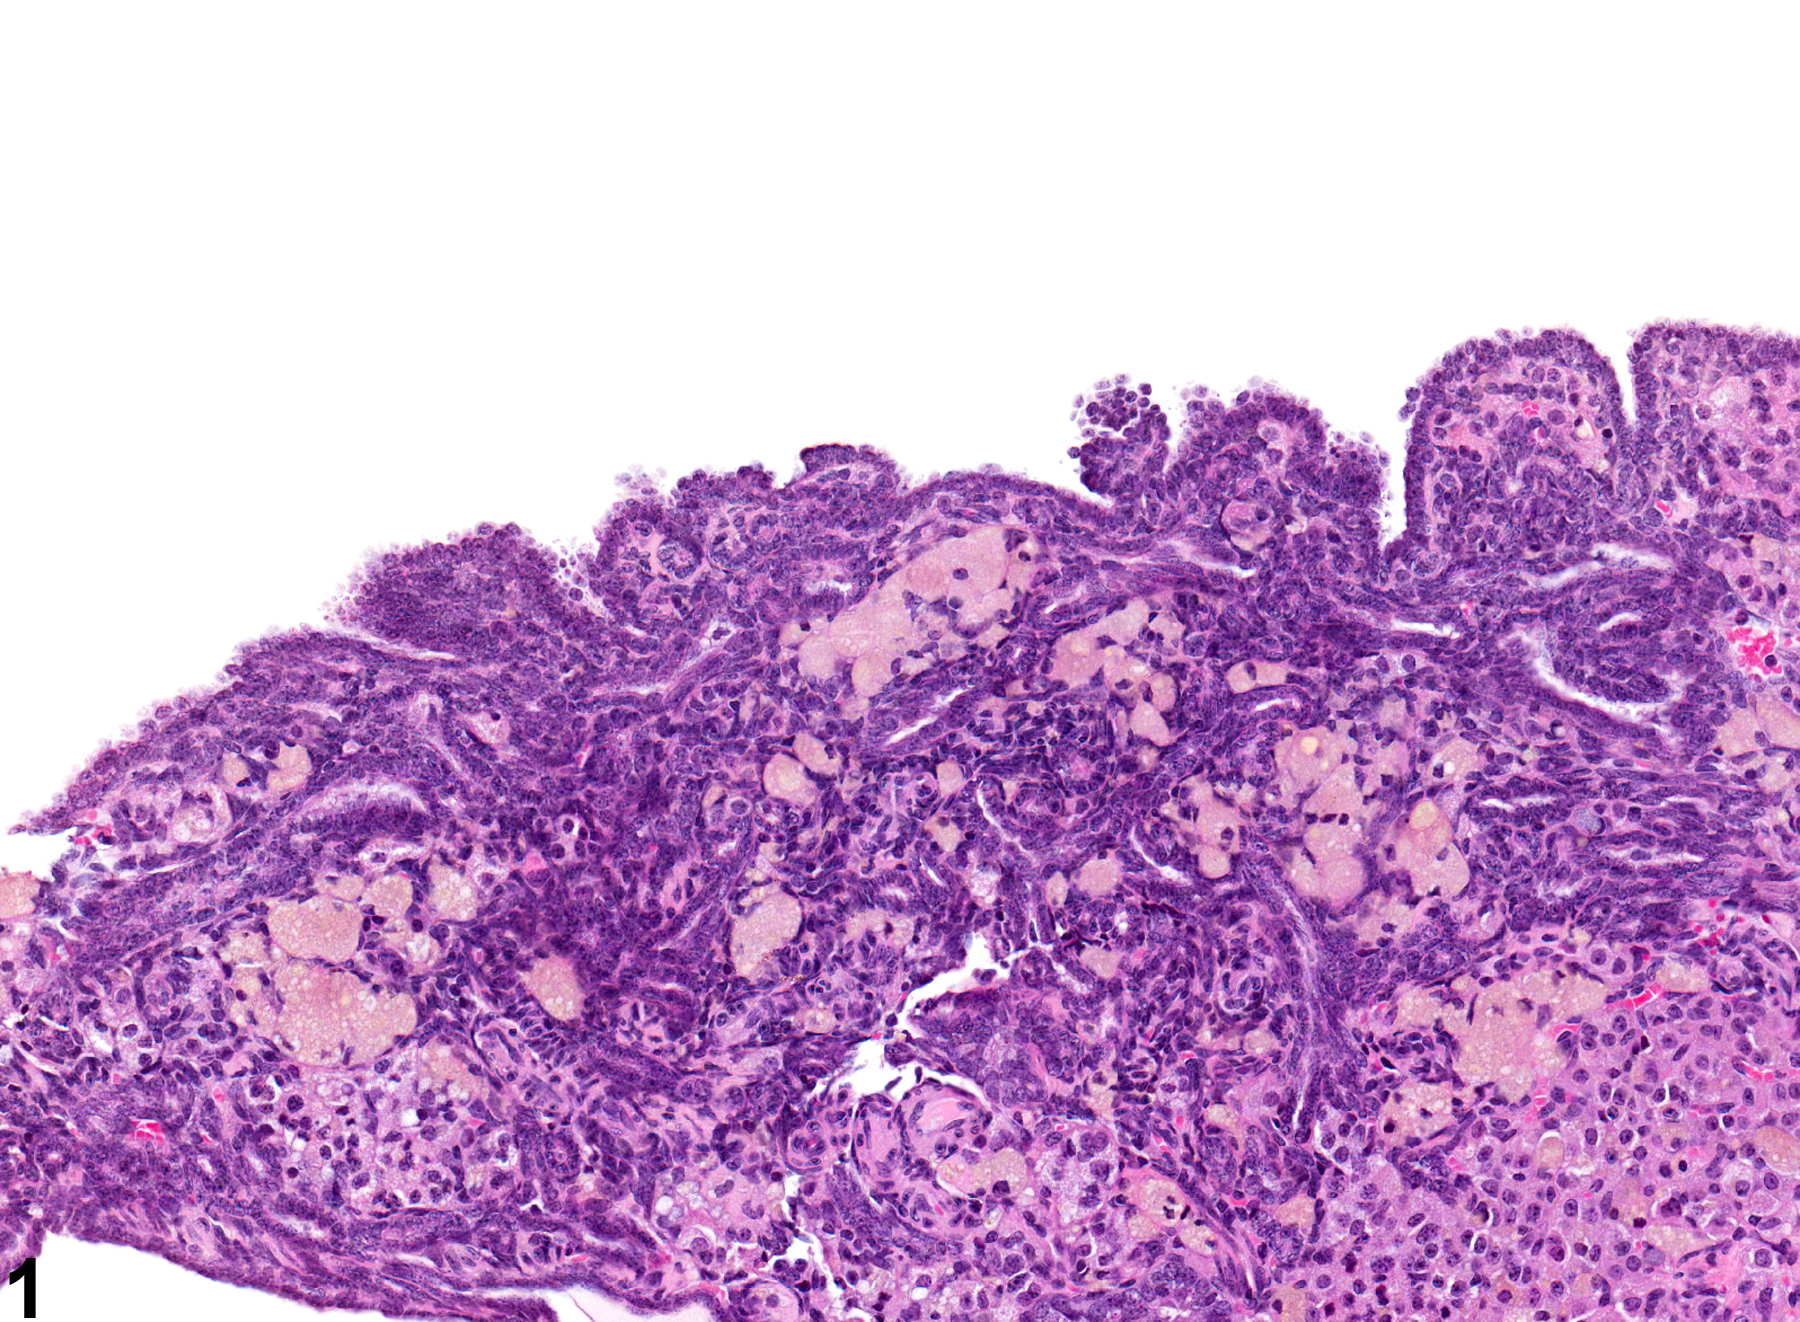 Image of epithelial hyperplasia in the ovary from a female F344/N rat in a chronic study